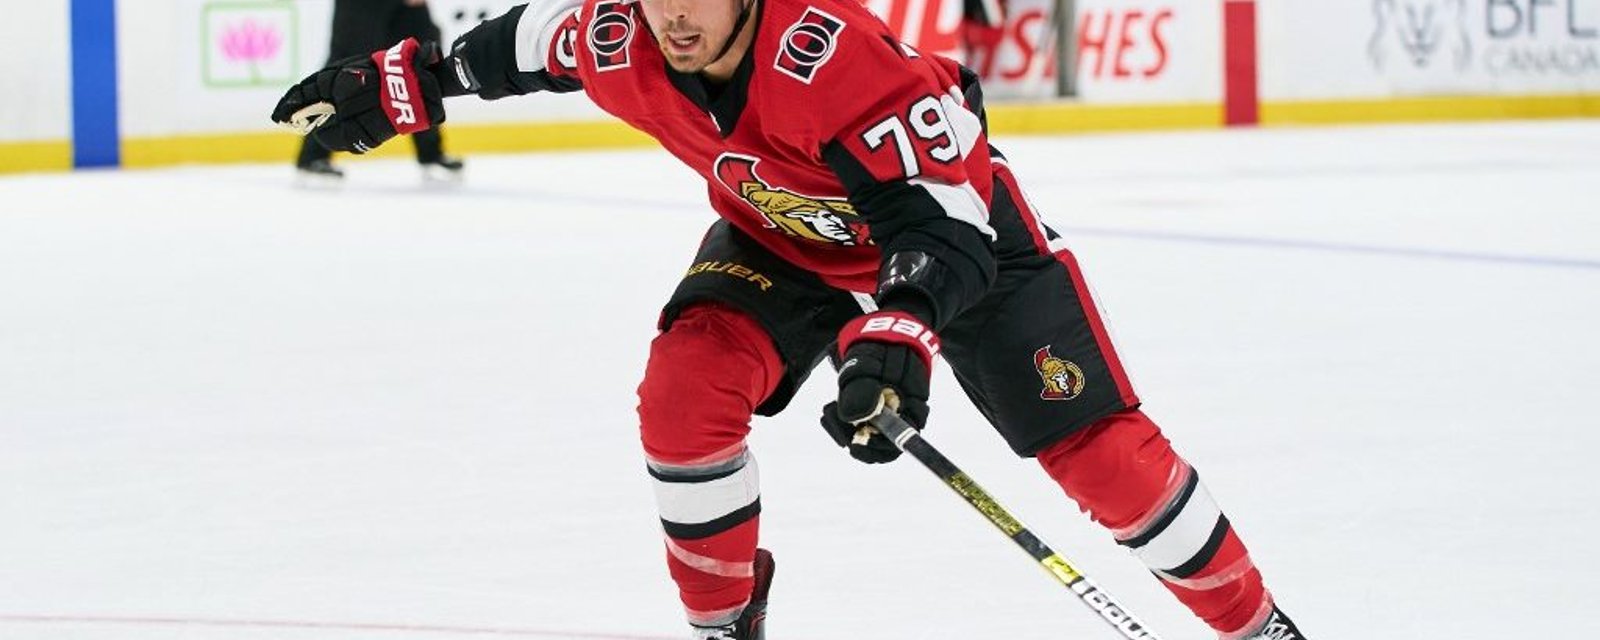 One of the Ottawa Senators diagnosed with COVID-19 speaks out